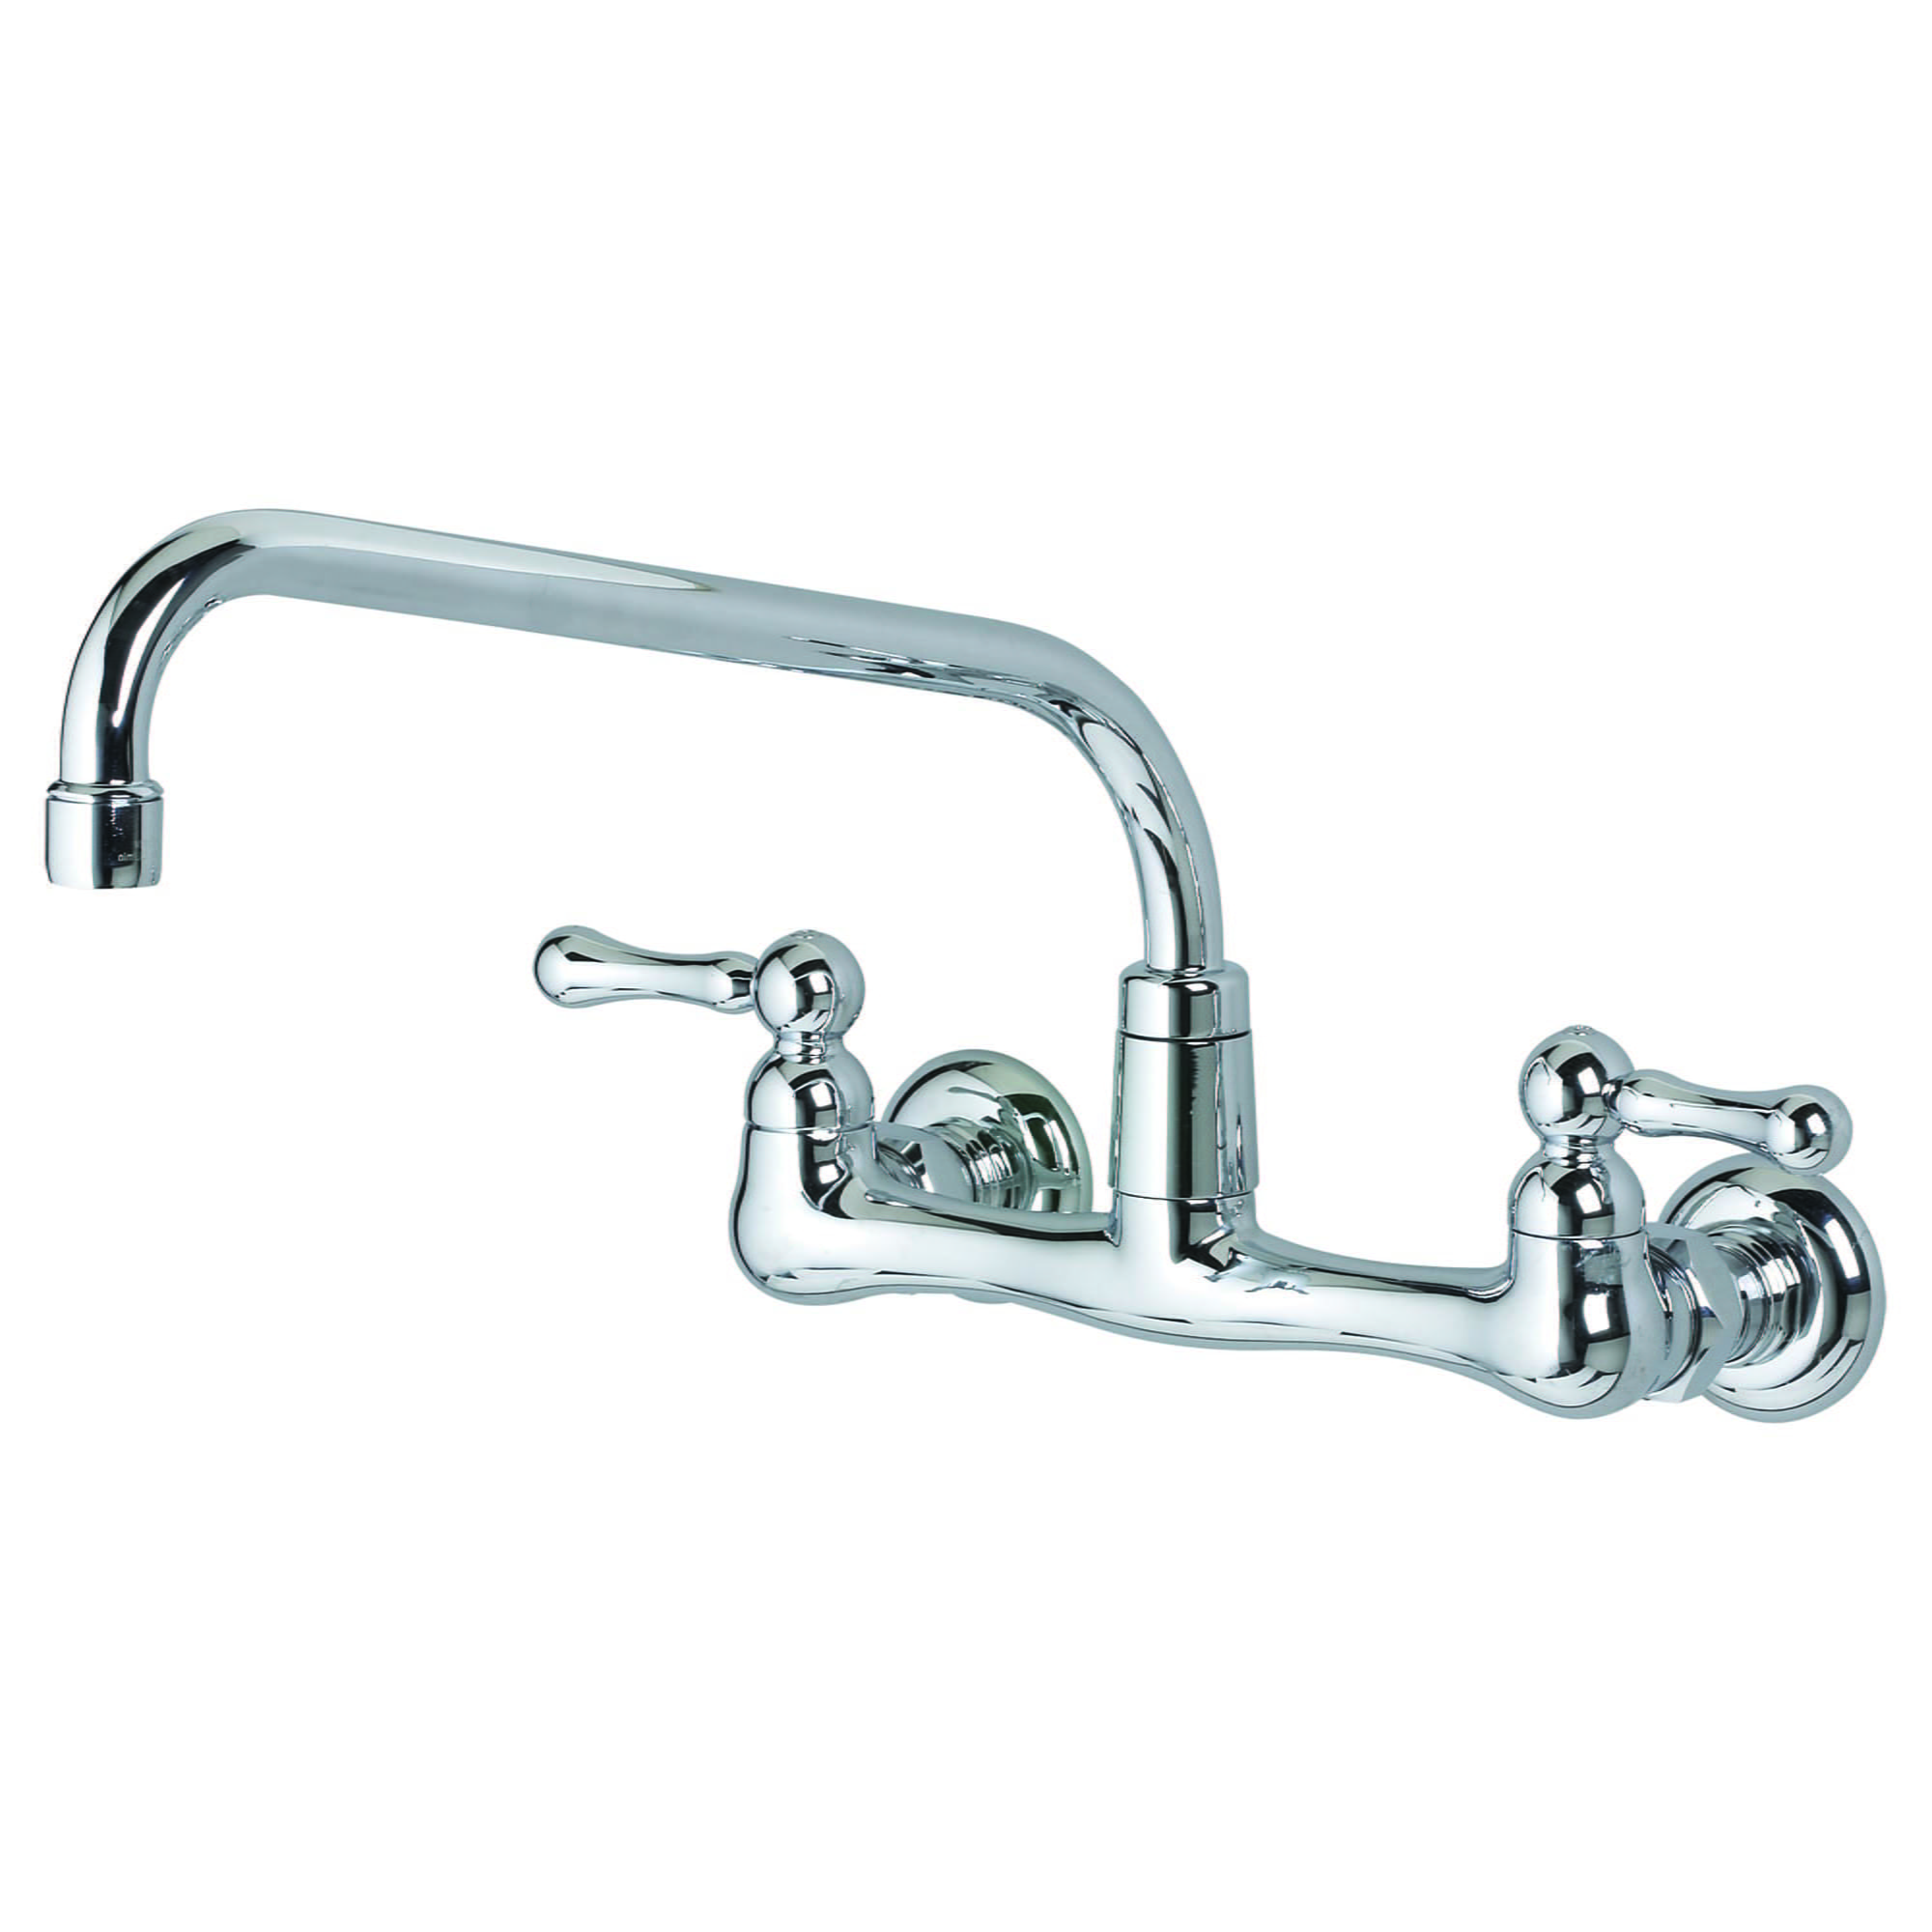 Heritage® Wall Mount Faucet With 12-Inch Tubular Brass Swivel Spout With Lever Handles